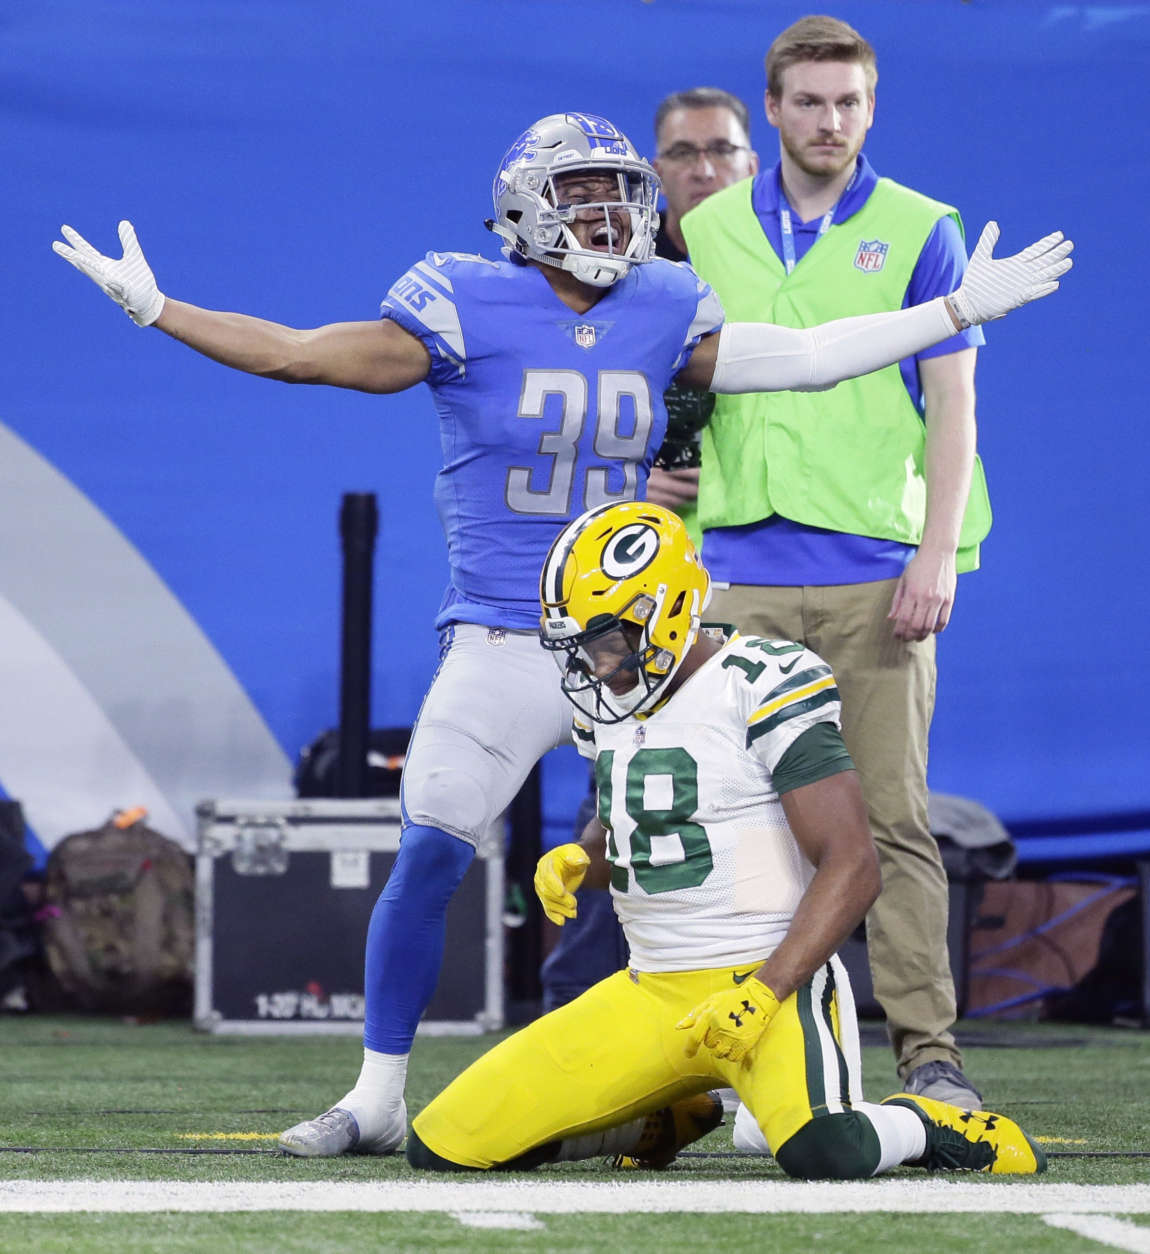 Detroit Lions cornerback Jamal Agnew (39) reacts after breaking up a pass intended for Green Bay Packers wide receiver Randall Cobb (18) during the second half of an NFL football game, Sunday, Dec. 31, 2017, in Detroit. (AP Photo/Duane Burleson)